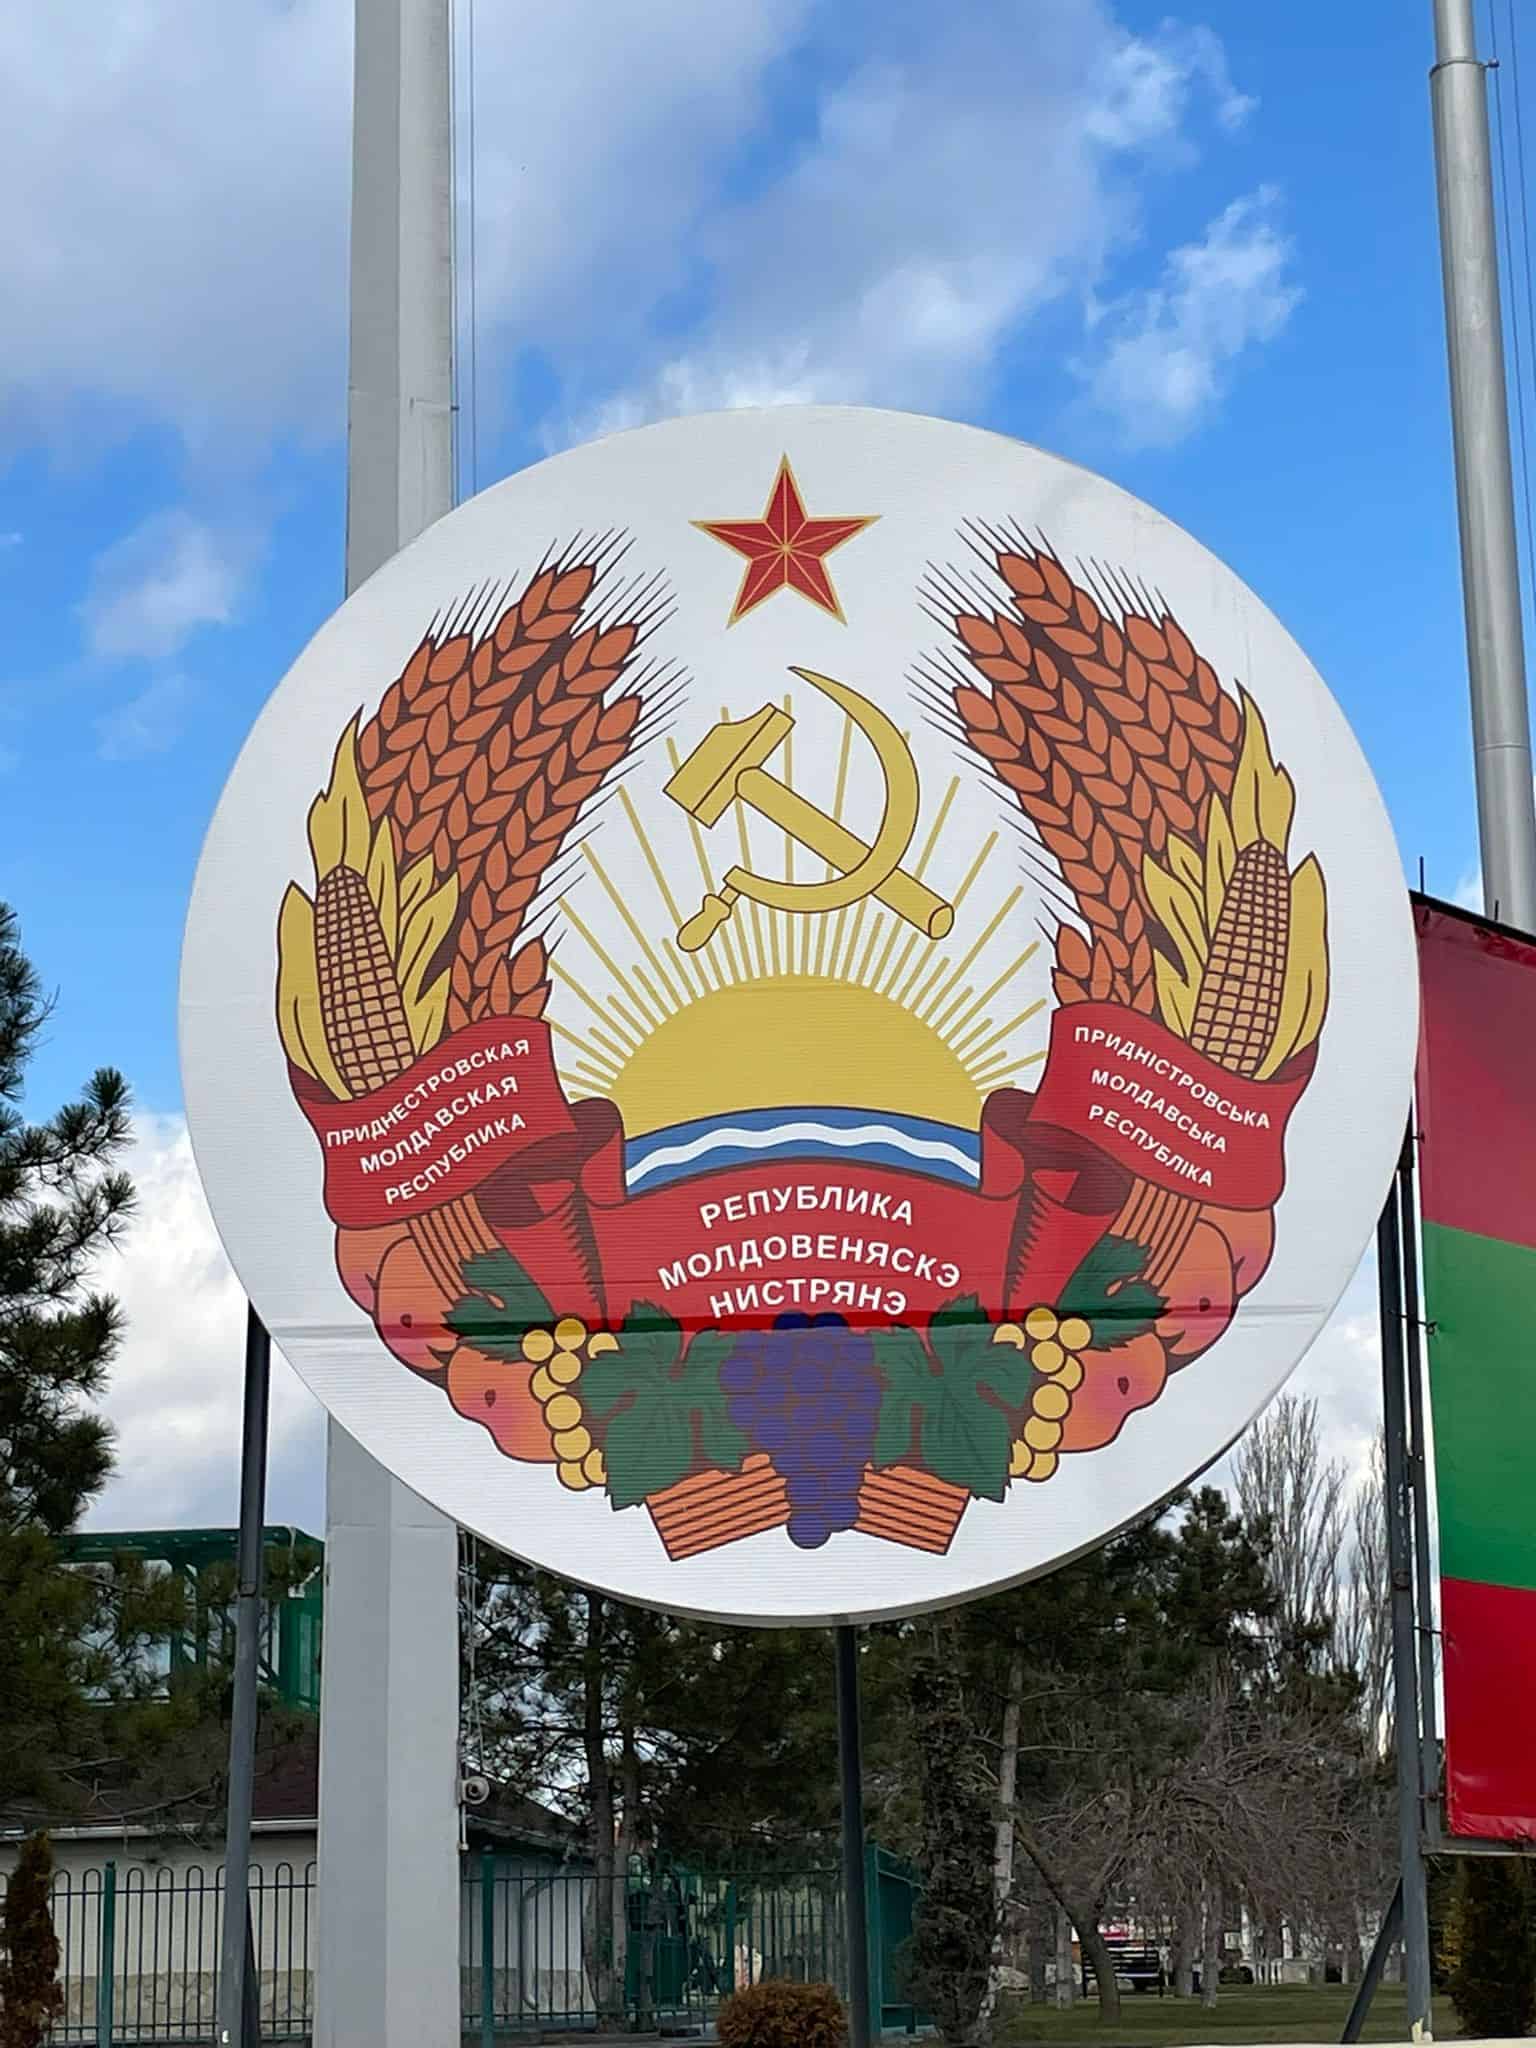 The coat of arms for Transnistria, a breakaway region within Moldova. It includes a hammer and sickle and a red star representing communism